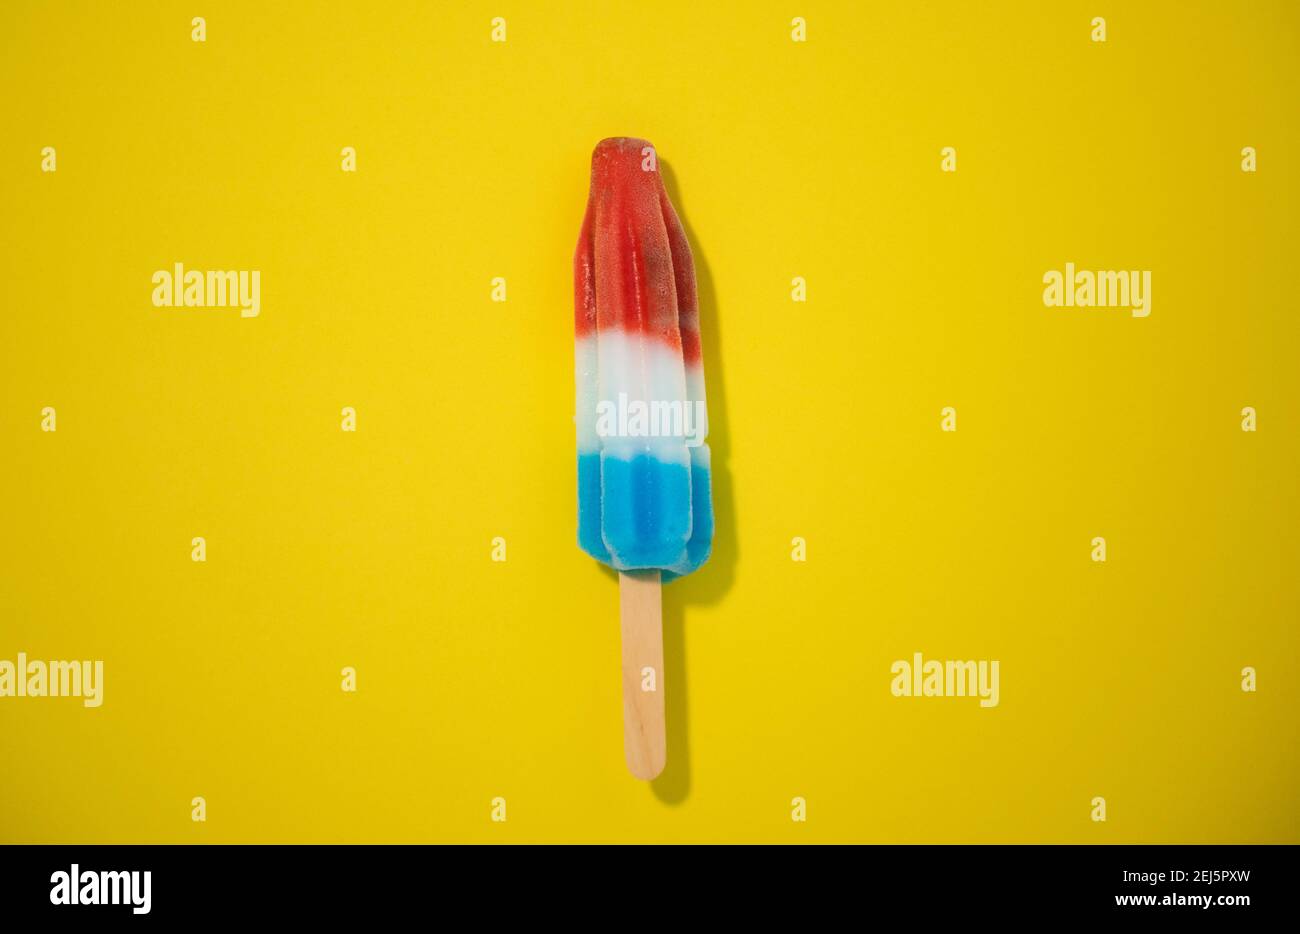 Novelty ice cream treat shot on solid colorful background. Series 1 of 9. Stock Photo